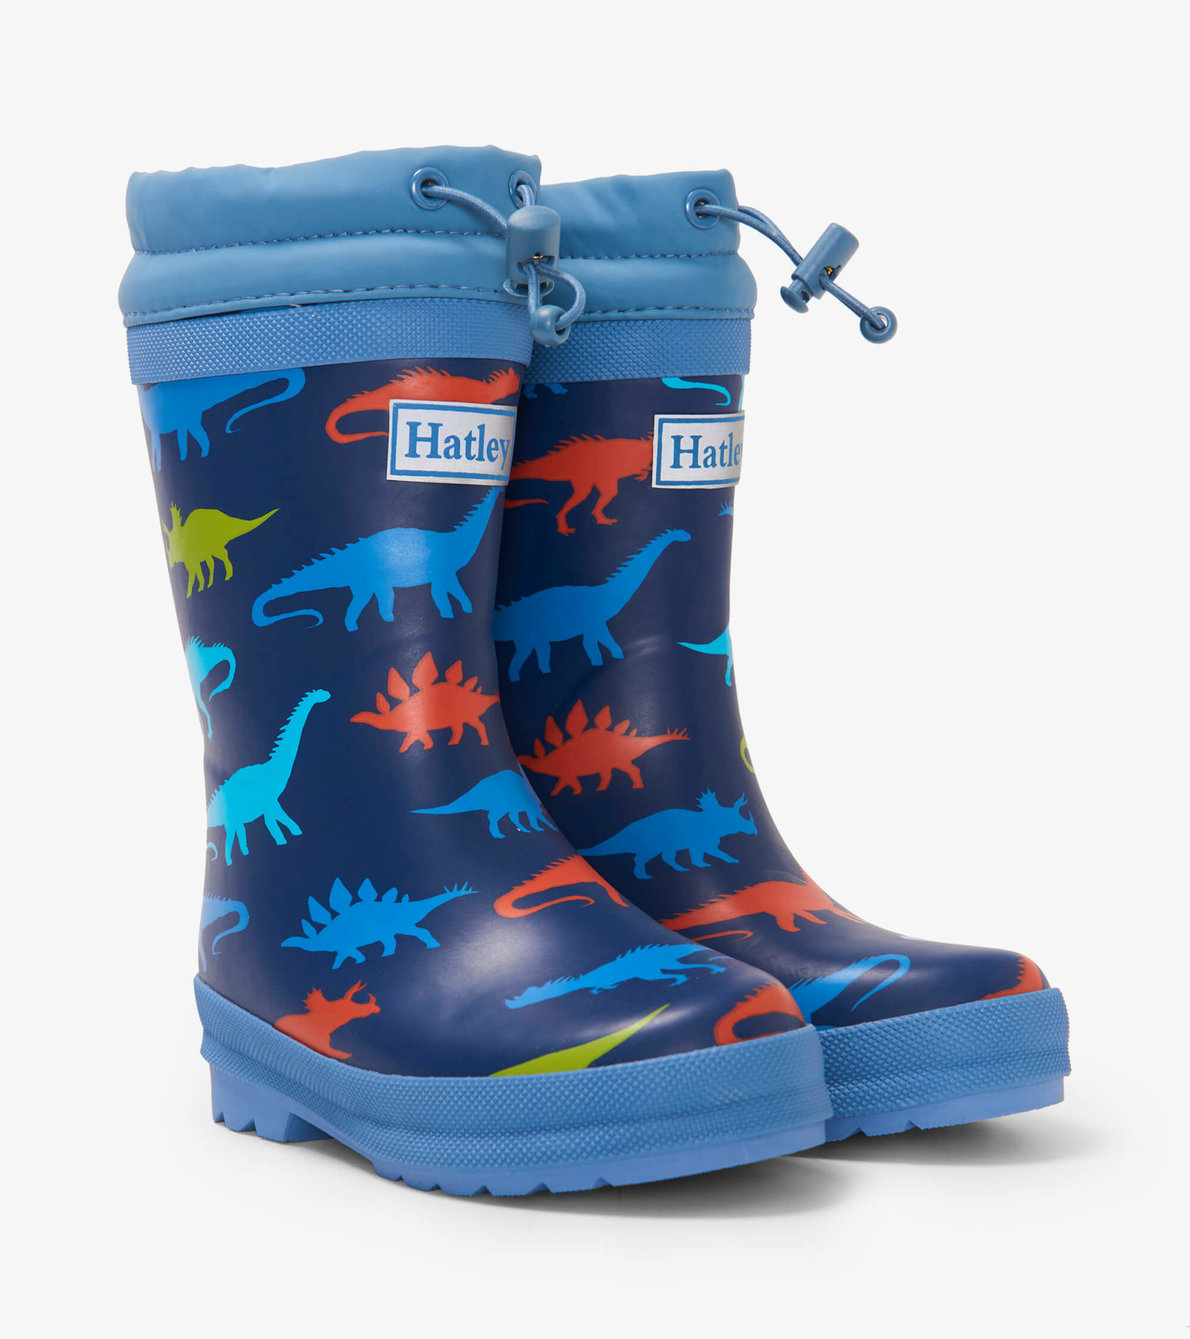 View larger image of My 1st Rain Boots - Dino Silhouettes Sherpa Lined